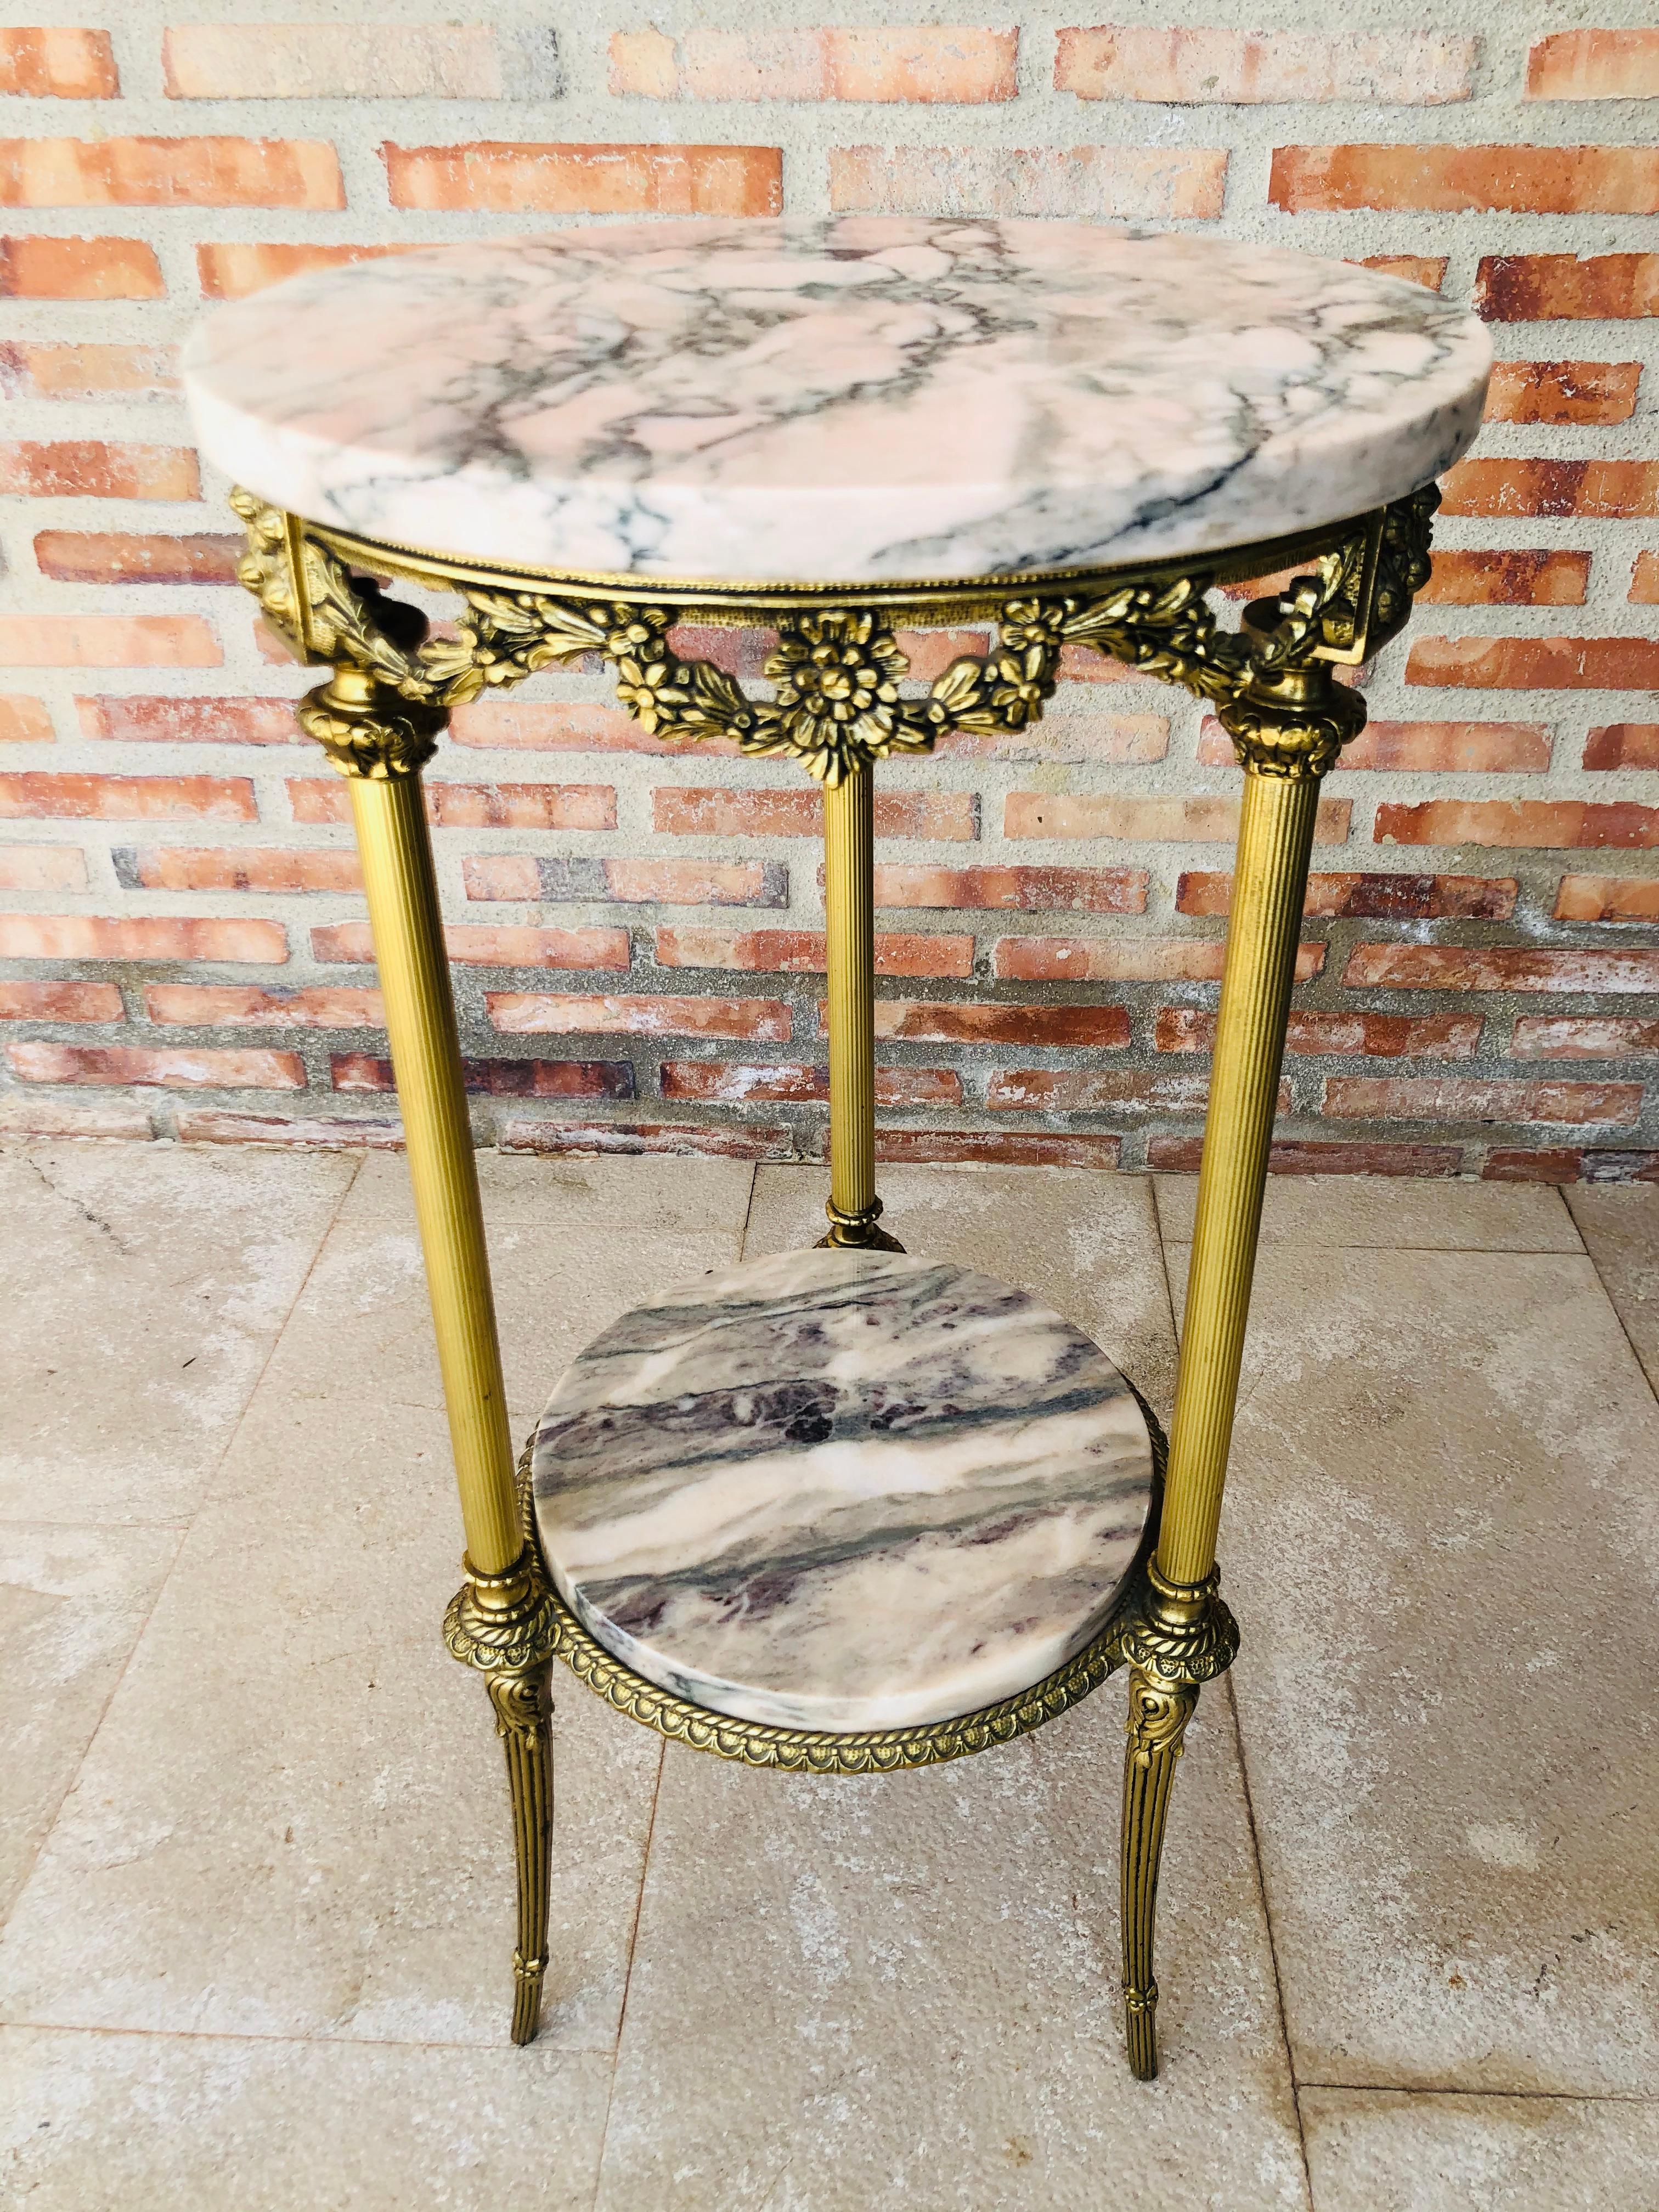 19th century Spanish bronze and brass gilded side table with white marble top
Beautiful bronze reliefs in the base of the top and ornamental motifs in the three pedestal leg.